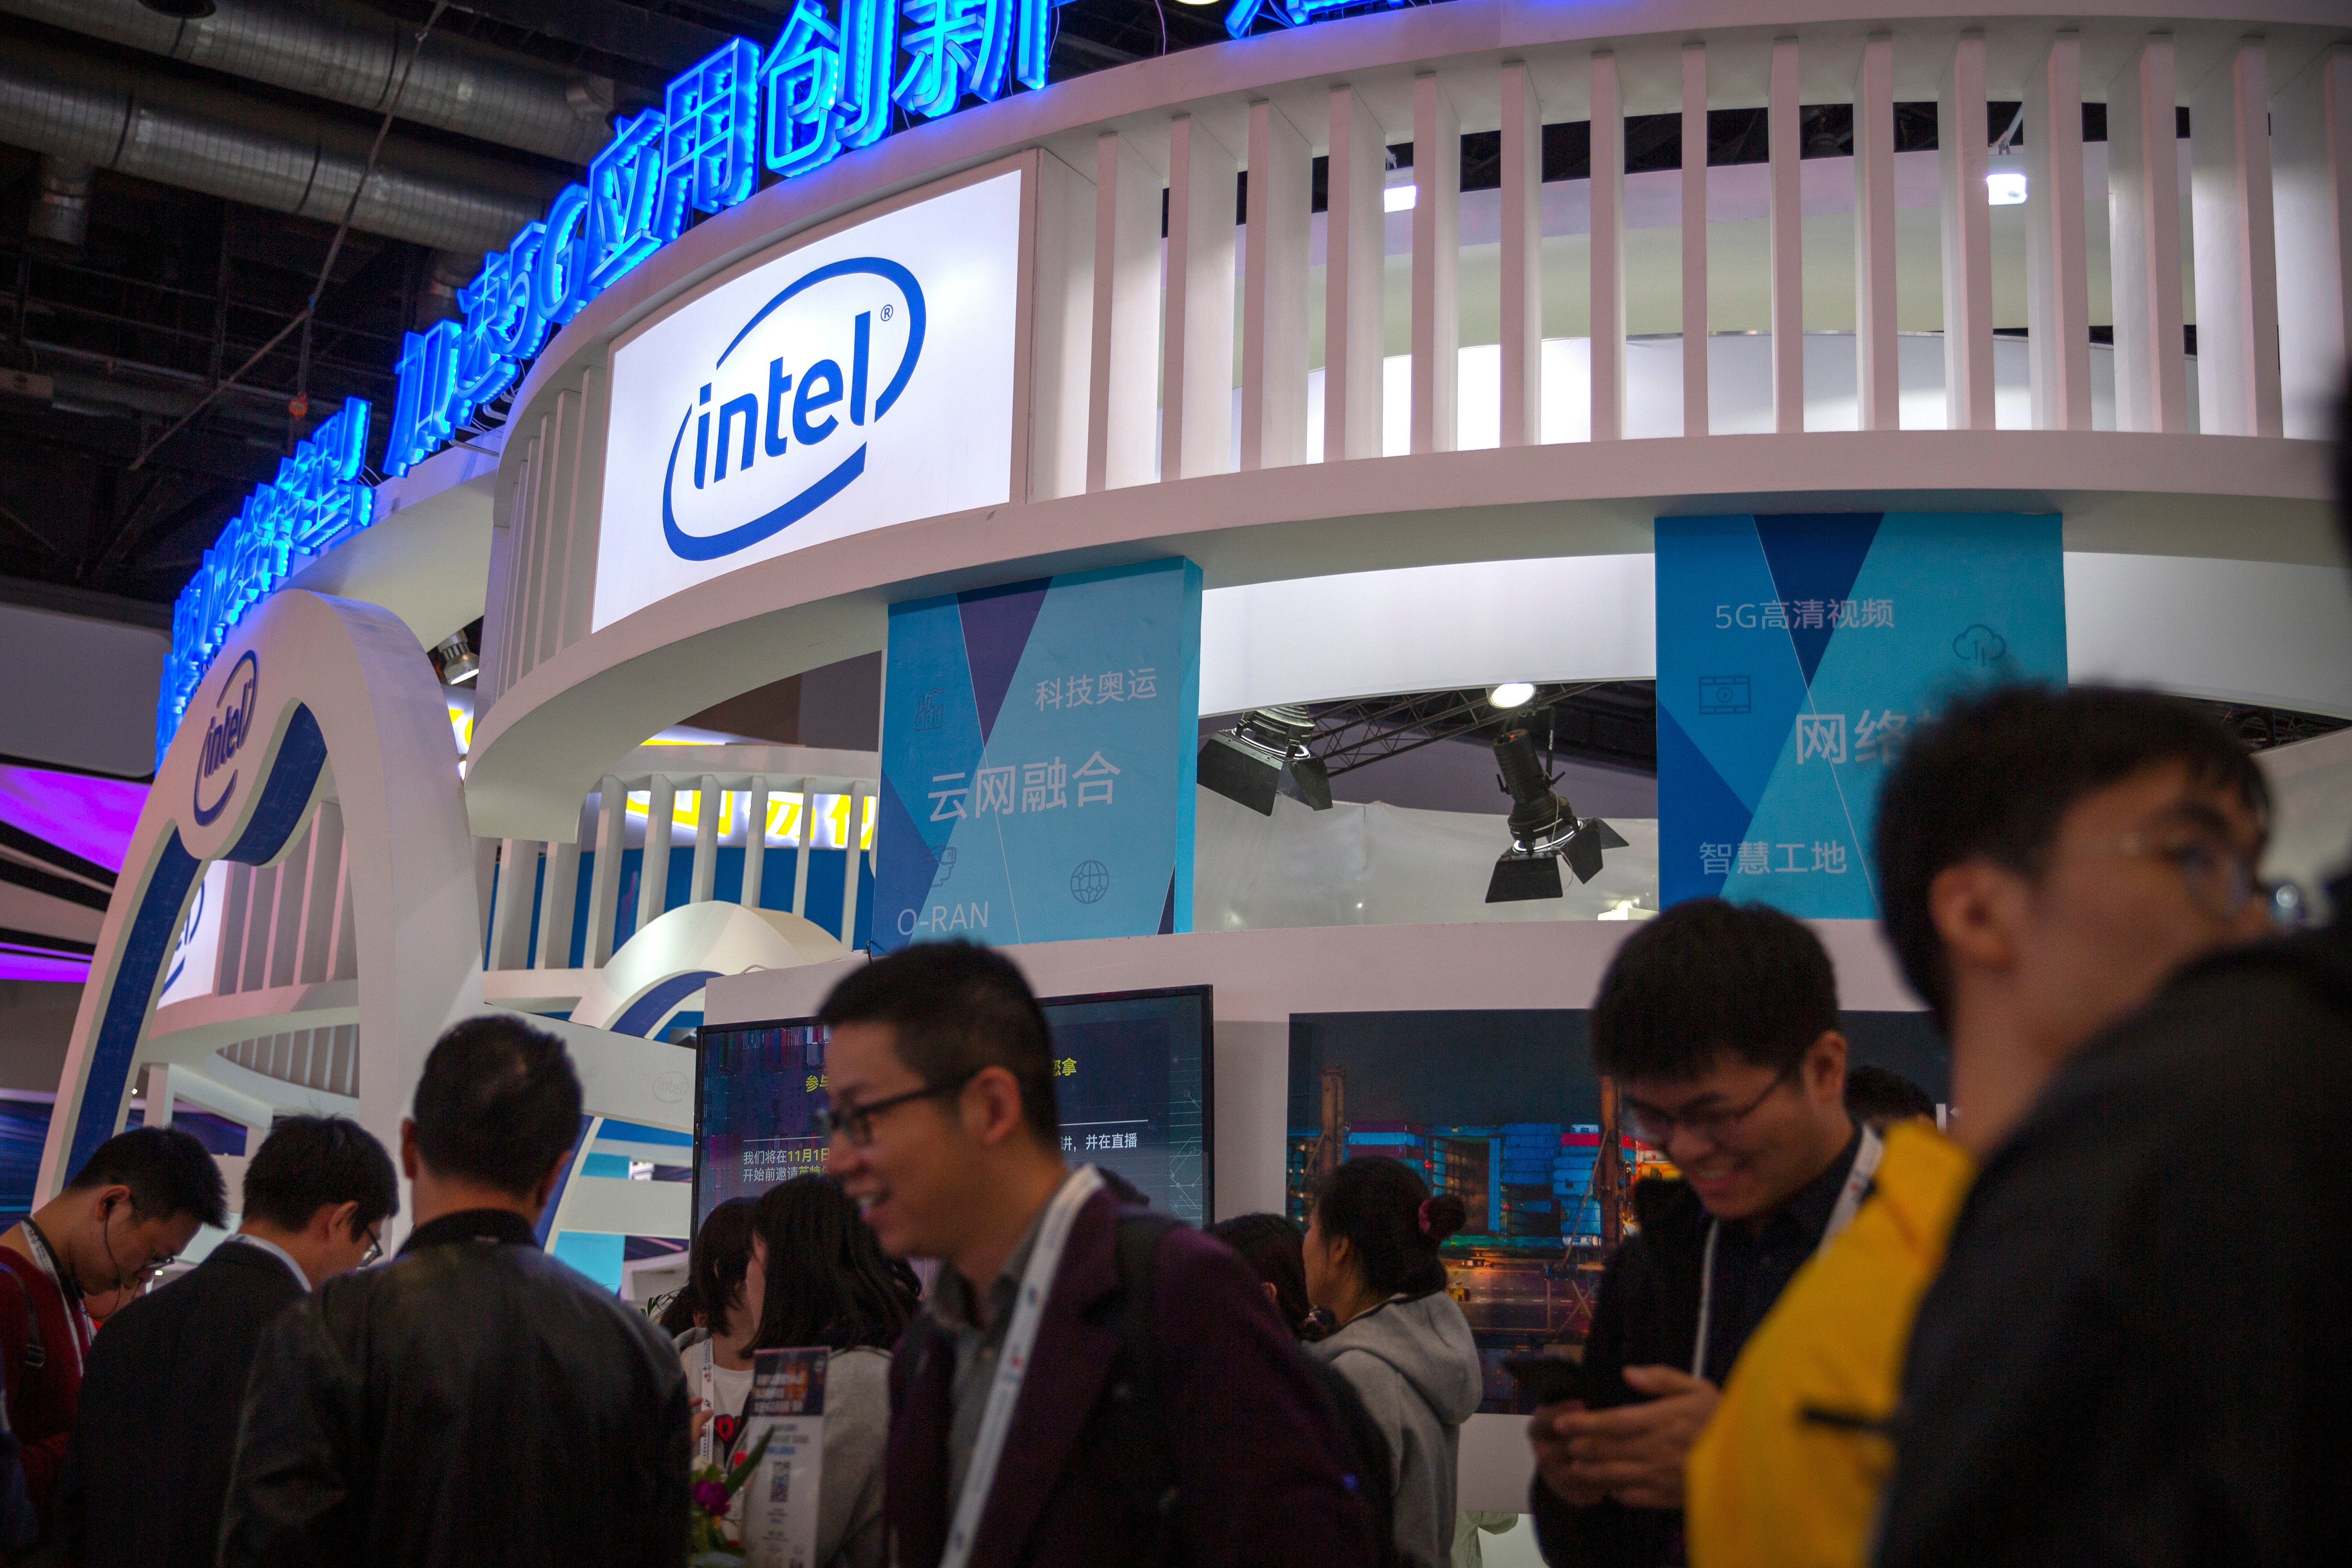 File Intel at the PT Expo in Beijing in 2019. Intel Corp. apologised Thursday for asking suppliers to avoid sourcing goods from Xinjiang